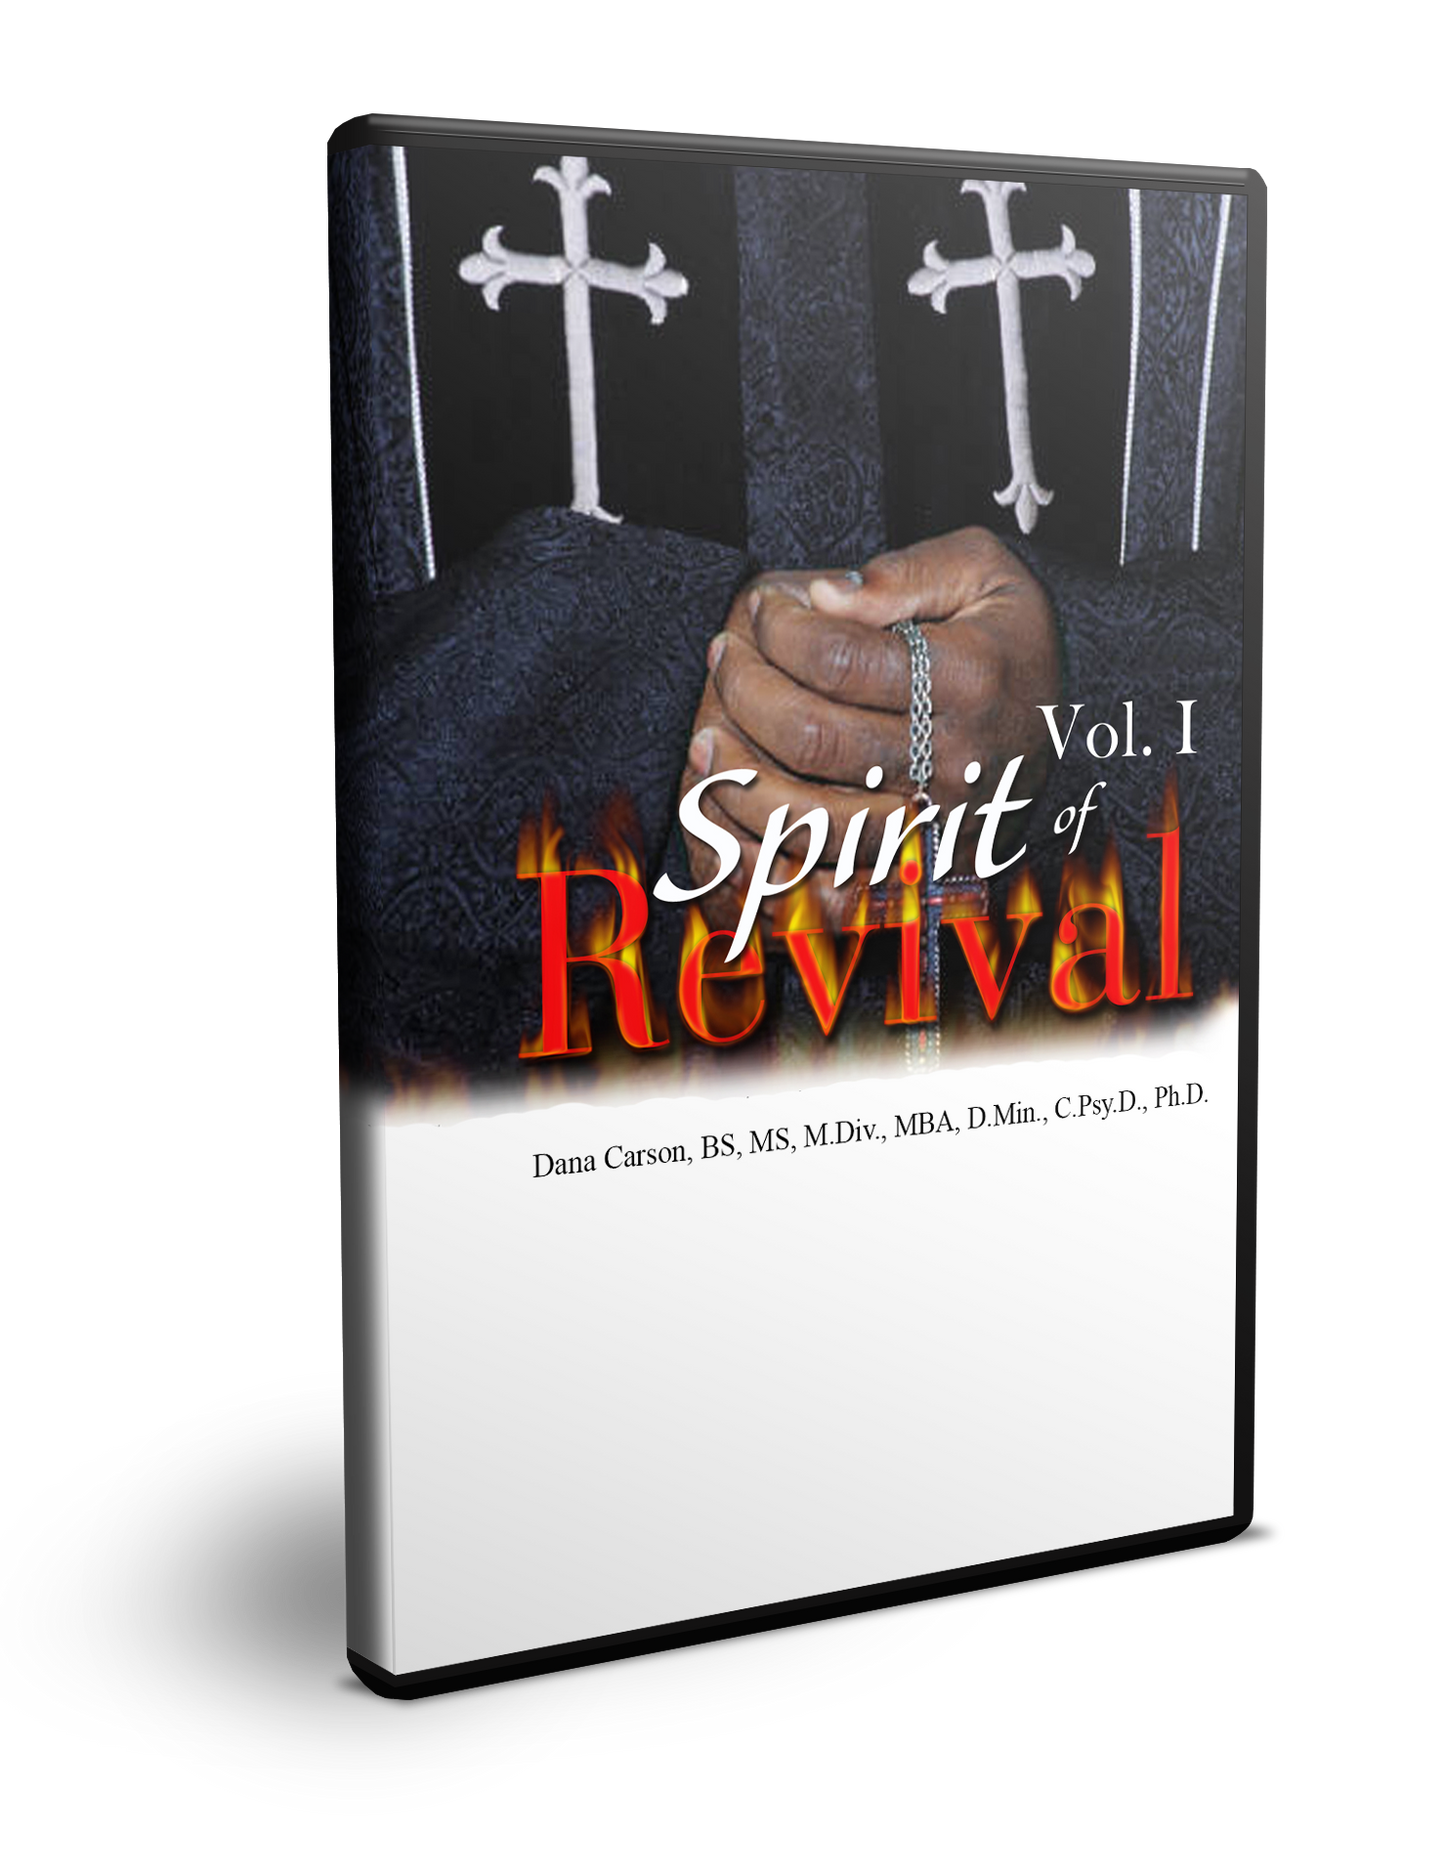 The Price of Revival